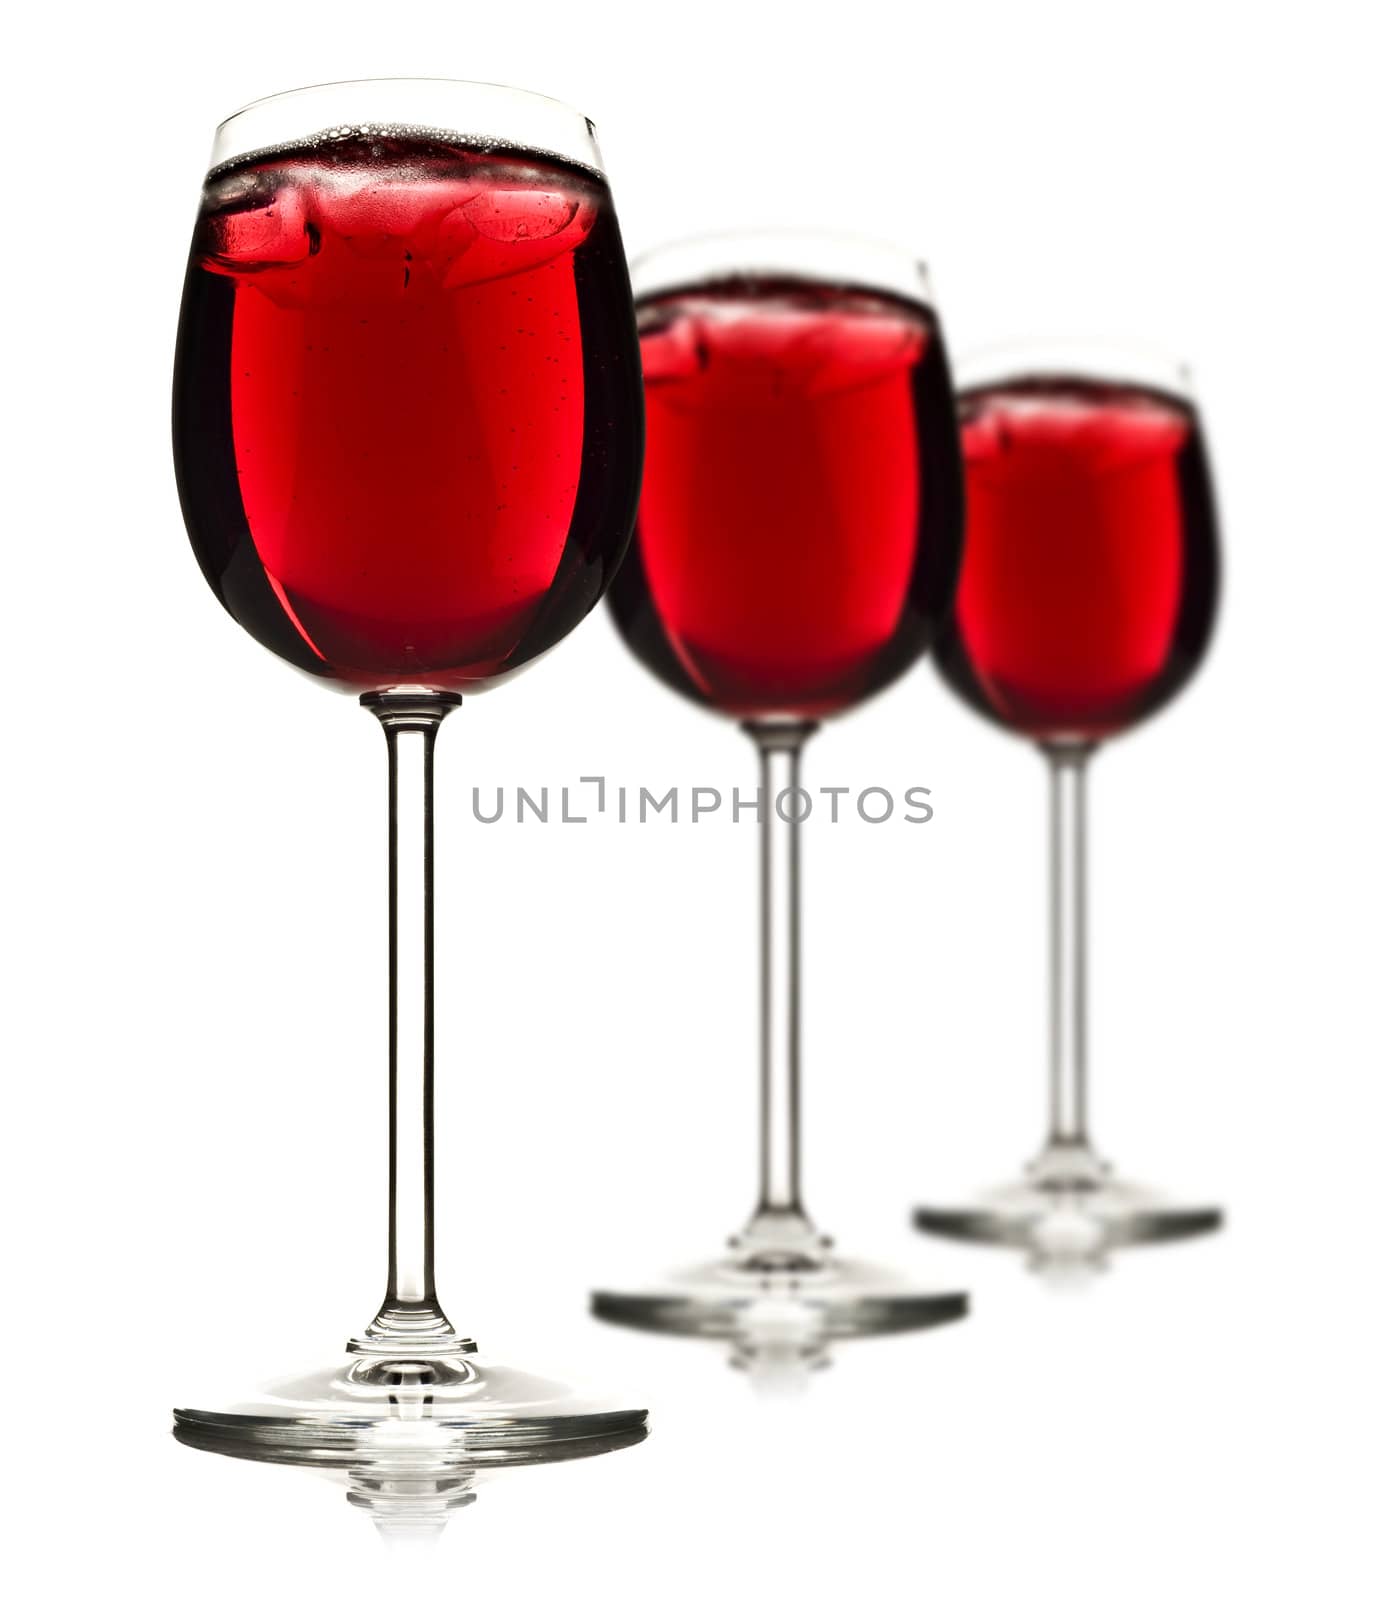 Three wine glasses with red fruit juice and ice by tish1